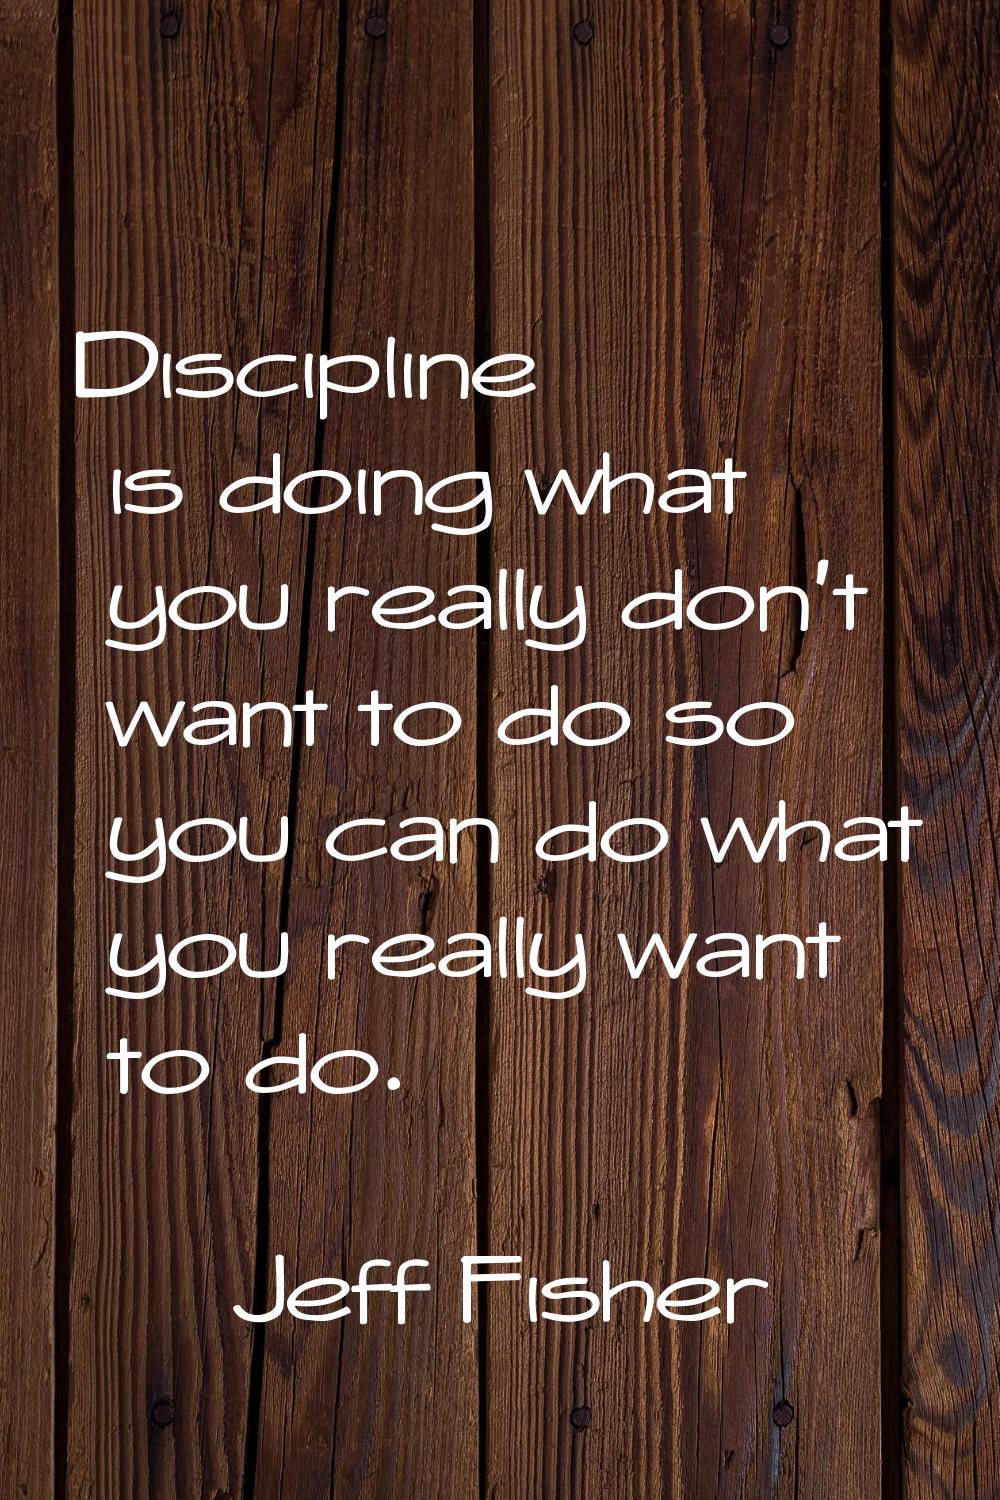 Discipline is doing what you really don't want to do so you can do what you really want to do.